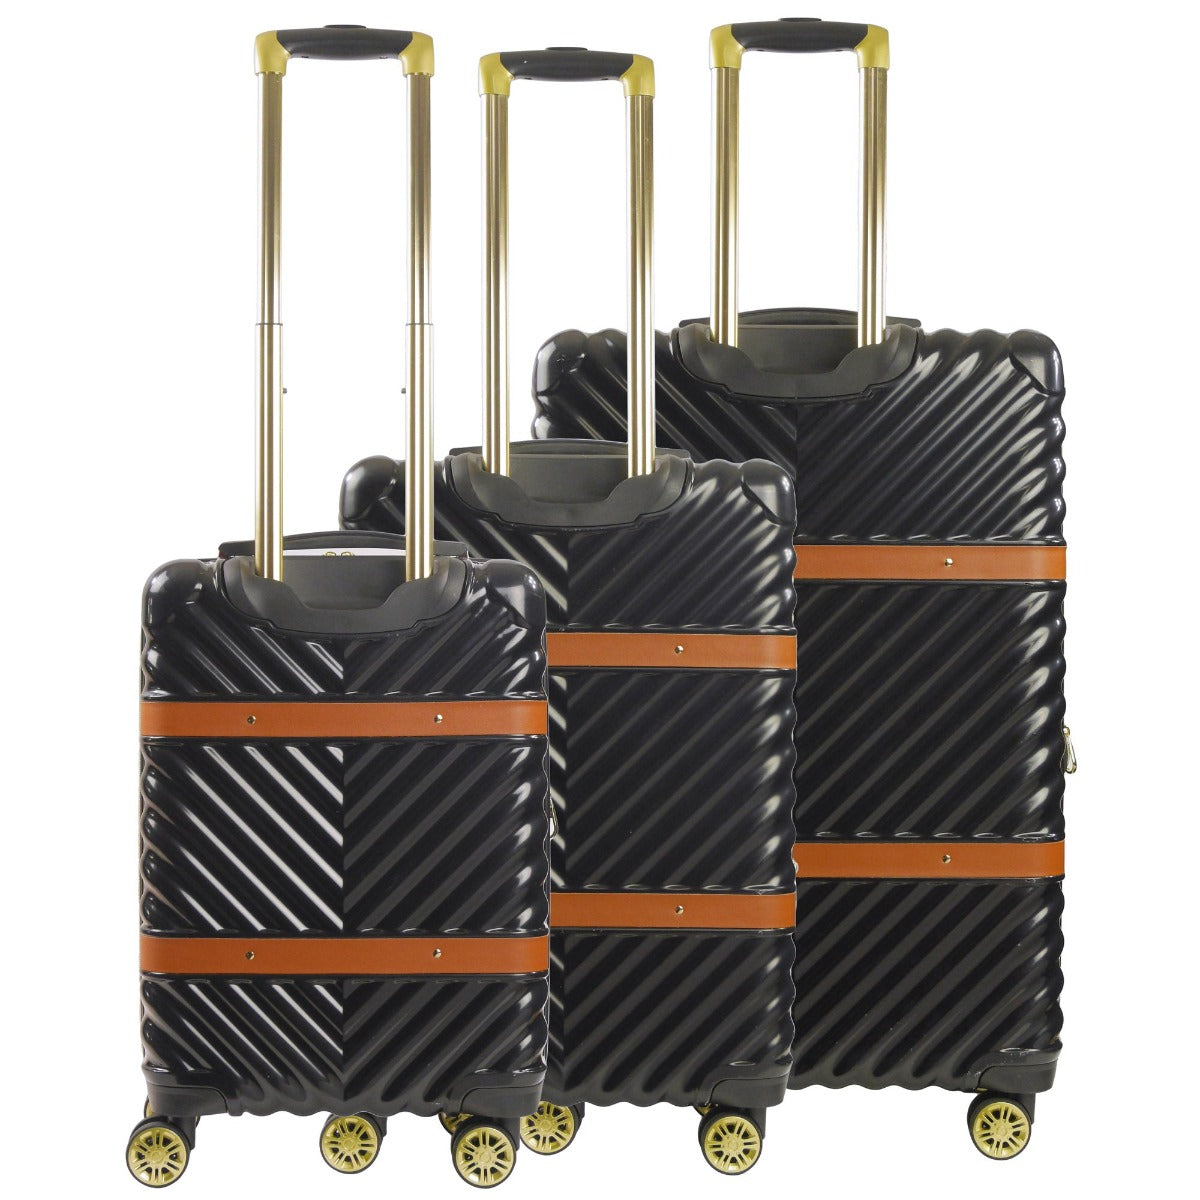 Christian Siriano New York Stella hardside spinner 3 piece luggage set black - best suitcase sets for travelling